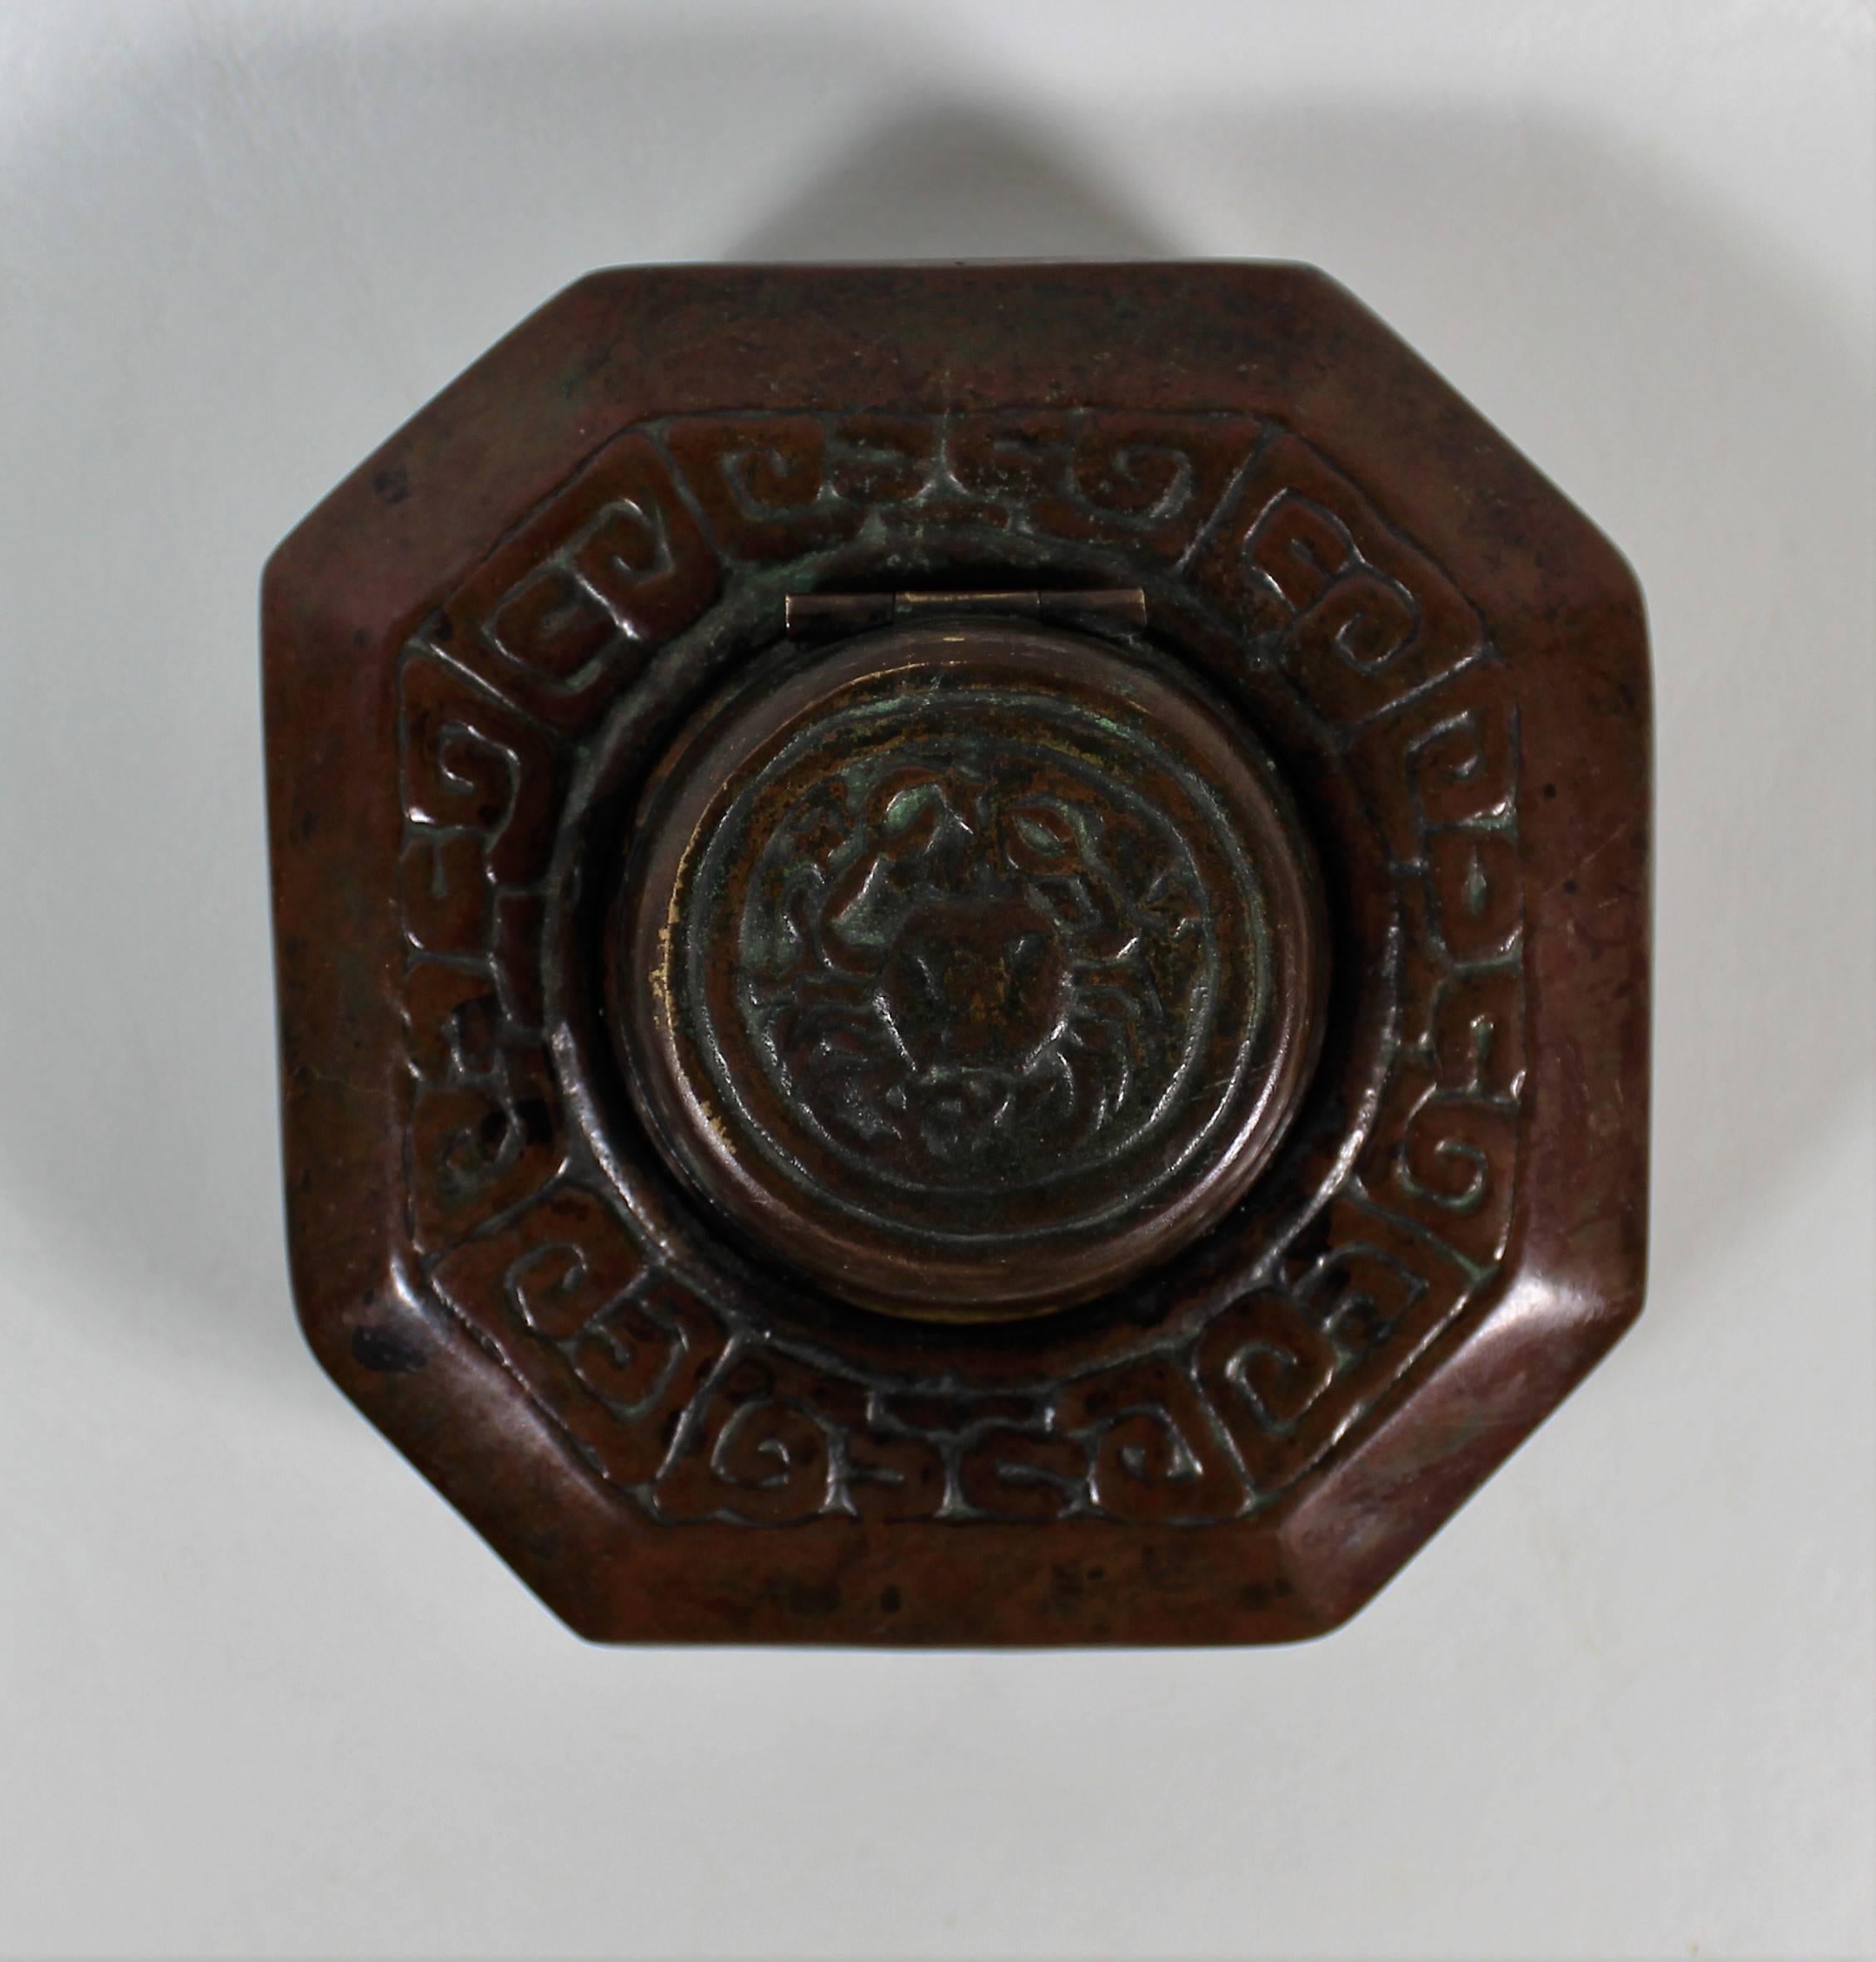 This octagonal shaped inkwell has a round lid opening to a glass insert. It is decorated with the Zodiac pattern with the crab on the lid to symbolize the Cancer sign. The popular zodiac pattern range of desk accessories features rustic, low relief